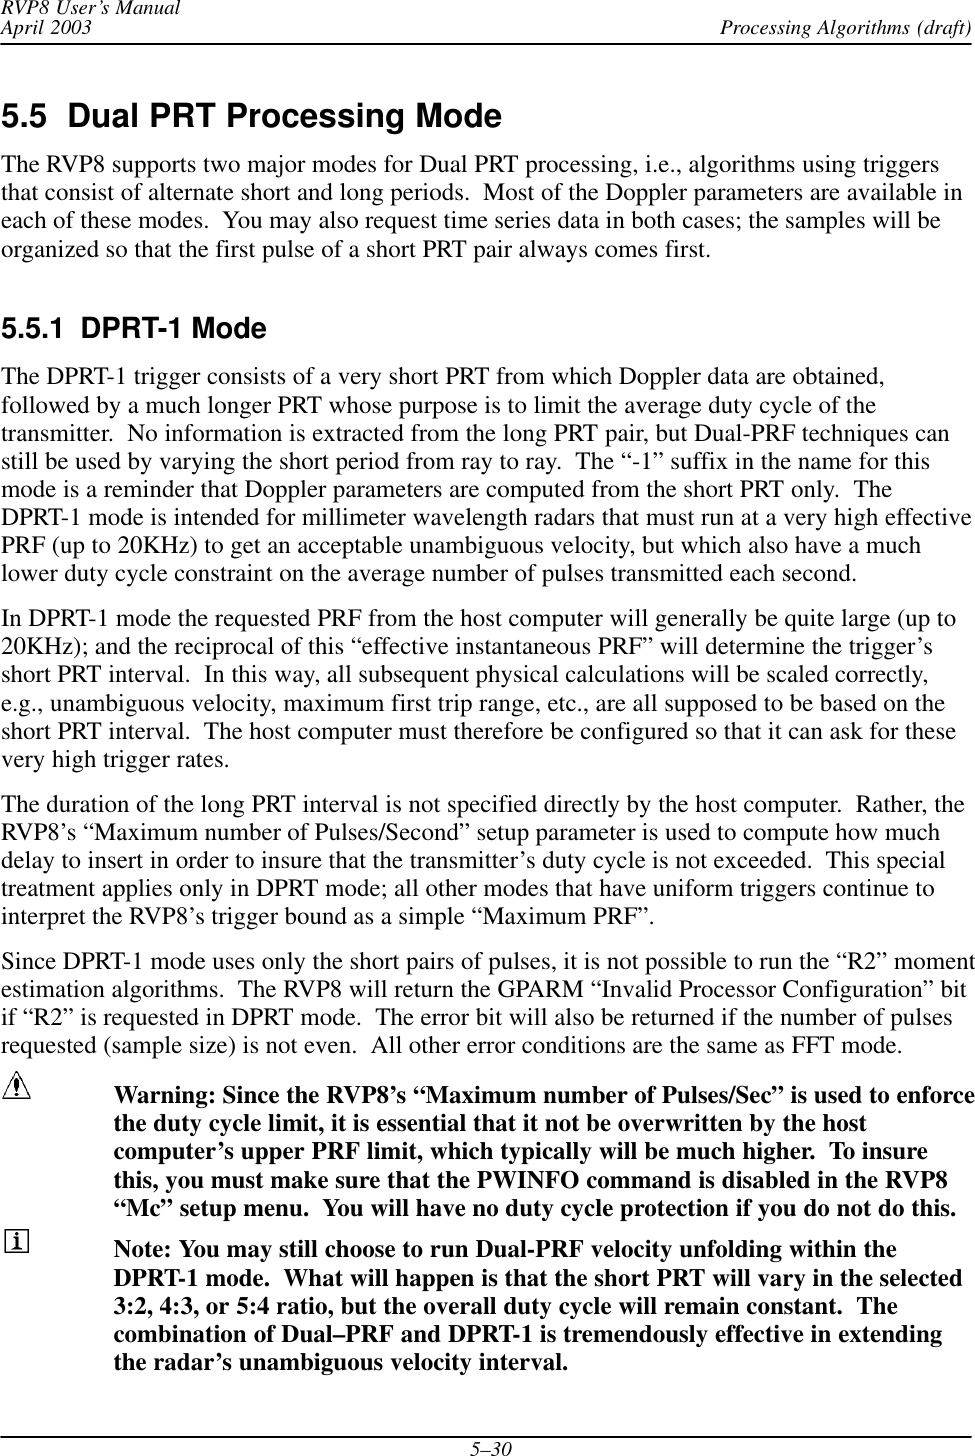 Processing Algorithms (draft)RVP8 User’s ManualApril 20035–305.5  Dual PRT Processing ModeThe RVP8 supports two major modes for Dual PRT processing, i.e., algorithms using triggersthat consist of alternate short and long periods.  Most of the Doppler parameters are available ineach of these modes.  You may also request time series data in both cases; the samples will beorganized so that the first pulse of a short PRT pair always comes first.5.5.1  DPRT-1 ModeThe DPRT-1 trigger consists of a very short PRT from which Doppler data are obtained,followed by a much longer PRT whose purpose is to limit the average duty cycle of thetransmitter.  No information is extracted from the long PRT pair, but Dual-PRF techniques canstill be used by varying the short period from ray to ray.  The “-1” suffix in the name for thismode is a reminder that Doppler parameters are computed from the short PRT only.  TheDPRT-1 mode is intended for millimeter wavelength radars that must run at a very high effectivePRF (up to 20KHz) to get an acceptable unambiguous velocity, but which also have a muchlower duty cycle constraint on the average number of pulses transmitted each second.In DPRT-1 mode the requested PRF from the host computer will generally be quite large (up to20KHz); and the reciprocal of this “effective instantaneous PRF” will determine the trigger’sshort PRT interval.  In this way, all subsequent physical calculations will be scaled correctly,e.g., unambiguous velocity, maximum first trip range, etc., are all supposed to be based on theshort PRT interval.  The host computer must therefore be configured so that it can ask for thesevery high trigger rates.The duration of the long PRT interval is not specified directly by the host computer.  Rather, theRVP8’s “Maximum number of Pulses/Second” setup parameter is used to compute how muchdelay to insert in order to insure that the transmitter’s duty cycle is not exceeded.  This specialtreatment applies only in DPRT mode; all other modes that have uniform triggers continue tointerpret the RVP8’s trigger bound as a simple “Maximum PRF”.Since DPRT-1 mode uses only the short pairs of pulses, it is not possible to run the “R2” momentestimation algorithms.  The RVP8 will return the GPARM “Invalid Processor Configuration” bitif “R2” is requested in DPRT mode.  The error bit will also be returned if the number of pulsesrequested (sample size) is not even.  All other error conditions are the same as FFT mode.Warning: Since the RVP8’s “Maximum number of Pulses/Sec” is used to enforcethe duty cycle limit, it is essential that it not be overwritten by the hostcomputer’s upper PRF limit, which typically will be much higher.  To insurethis, you must make sure that the PWINFO command is disabled in the RVP8“Mc” setup menu.  You will have no duty cycle protection if you do not do this.Note: You may still choose to run Dual-PRF velocity unfolding within theDPRT-1 mode.  What will happen is that the short PRT will vary in the selected3:2, 4:3, or 5:4 ratio, but the overall duty cycle will remain constant.  Thecombination of Dual–PRF and DPRT-1 is tremendously effective in extendingthe radar’s unambiguous velocity interval.